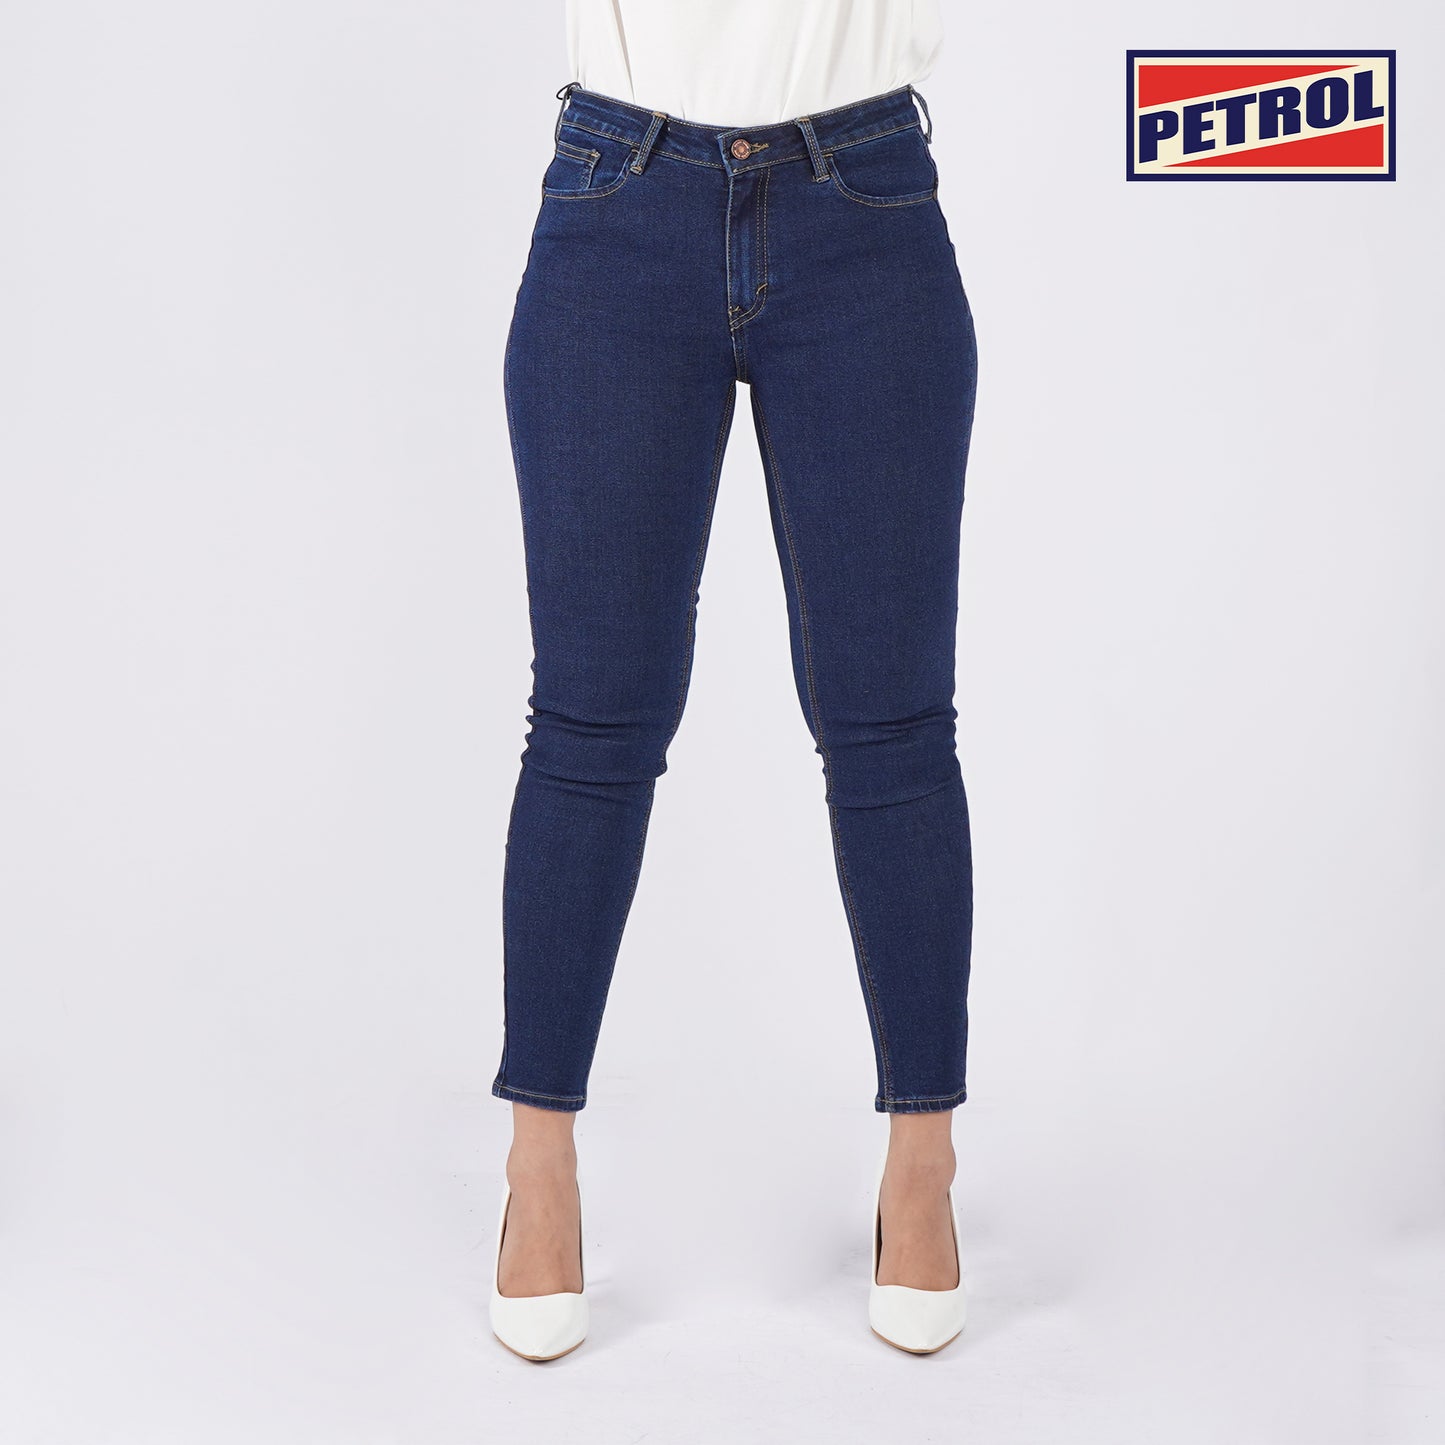 Petrol Ladies Basic Denim Fashionable Casual Apparel Stretchable Maong Pants For Women Super skinny Fitting High waist Trendy Fashion High Quality Stretchable Jeans For Women 139297-U (Dark Shade)